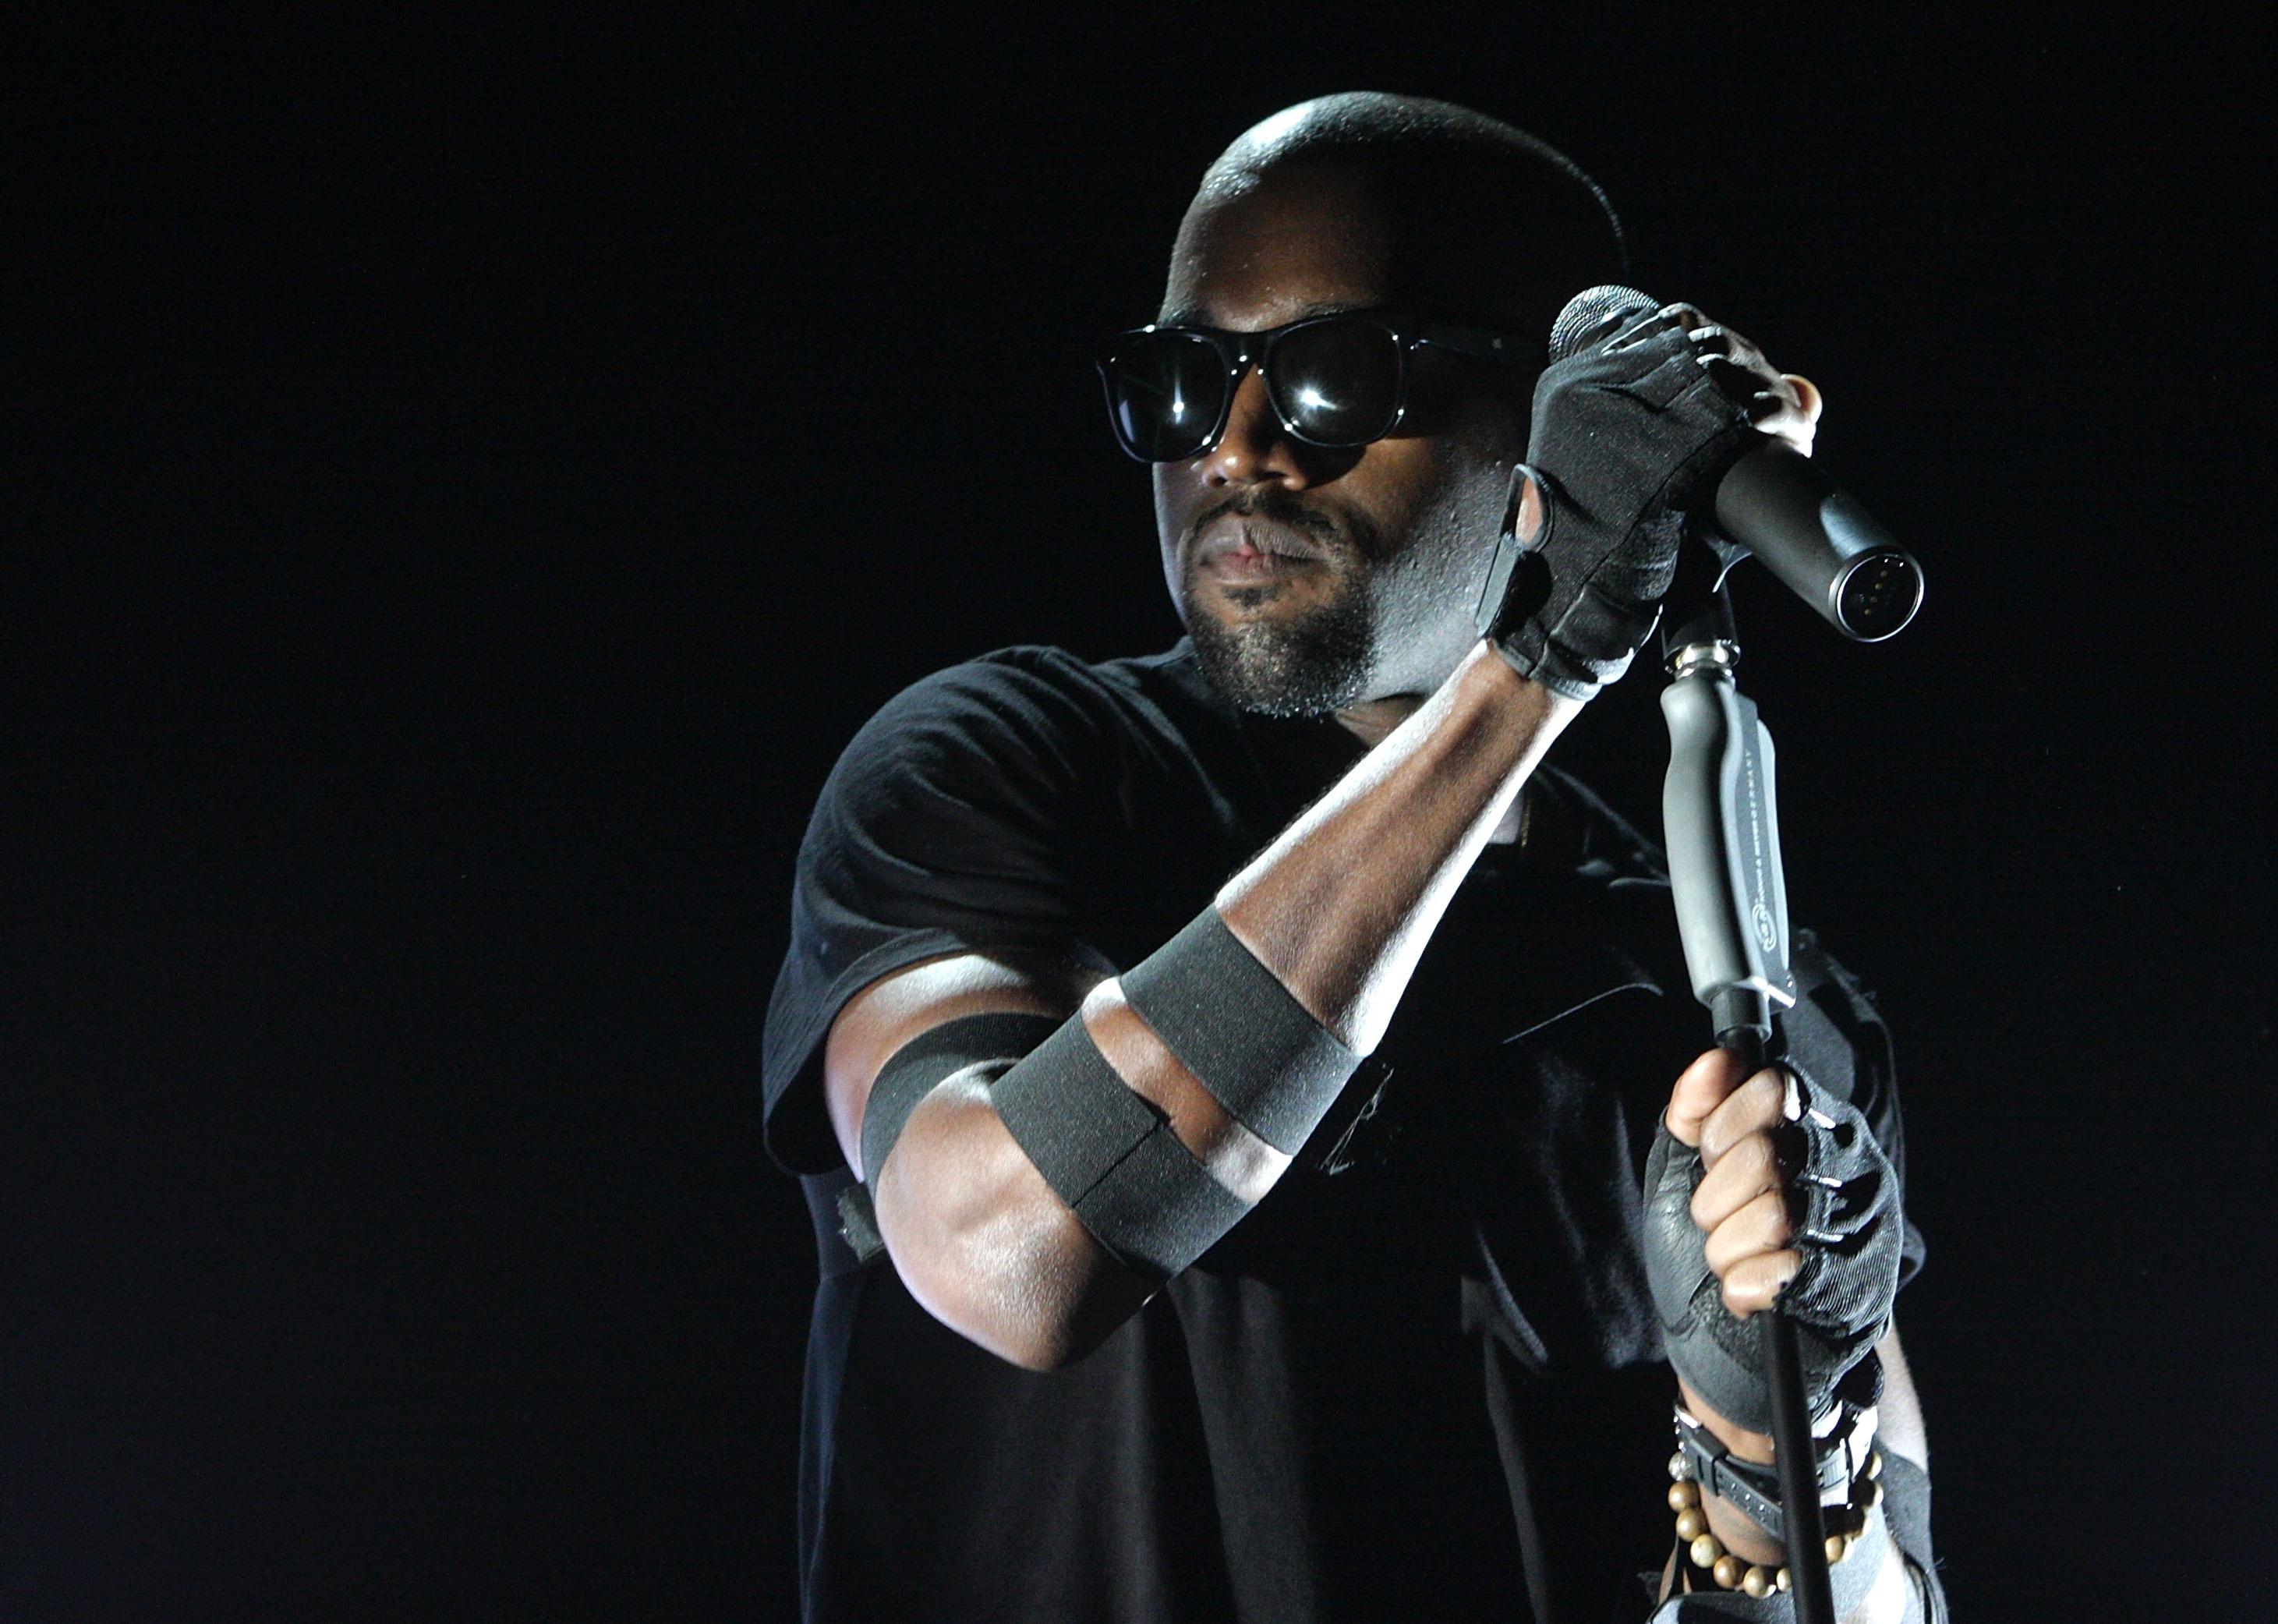 Kanye West Performs at the Casio G-Shock "Shock The World Tour."